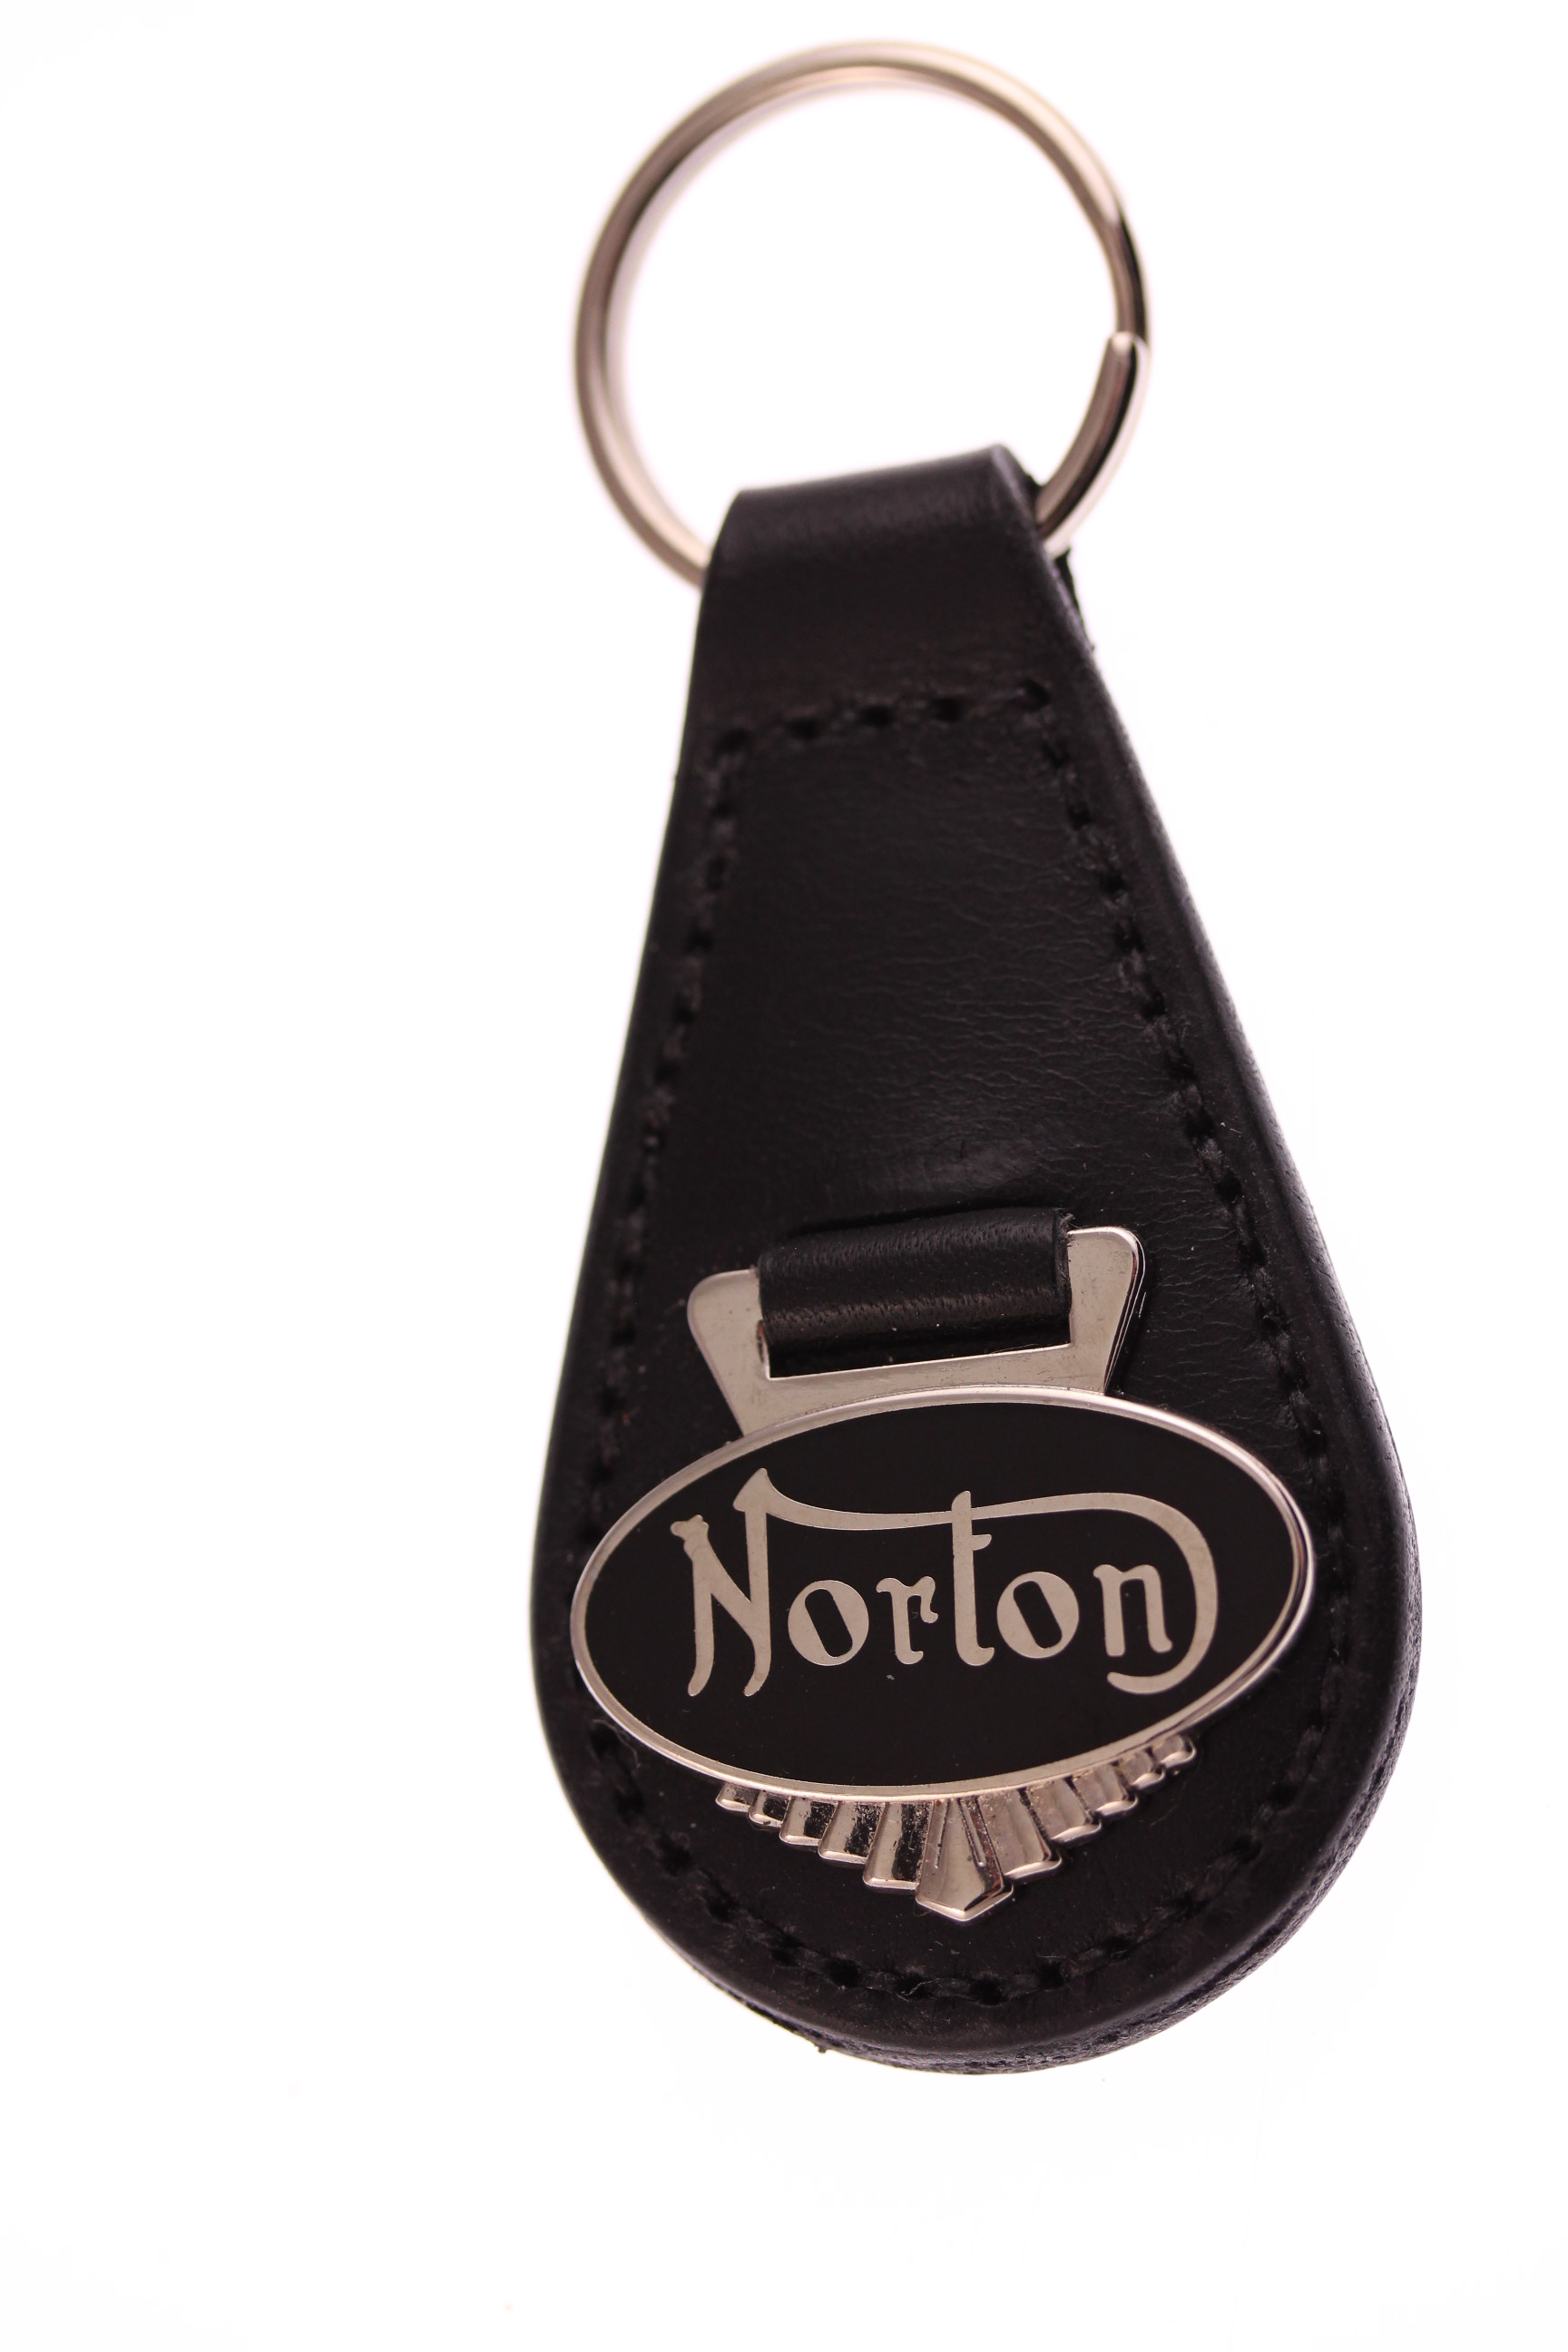 Norton motorcycle leather and enamel key ring fob